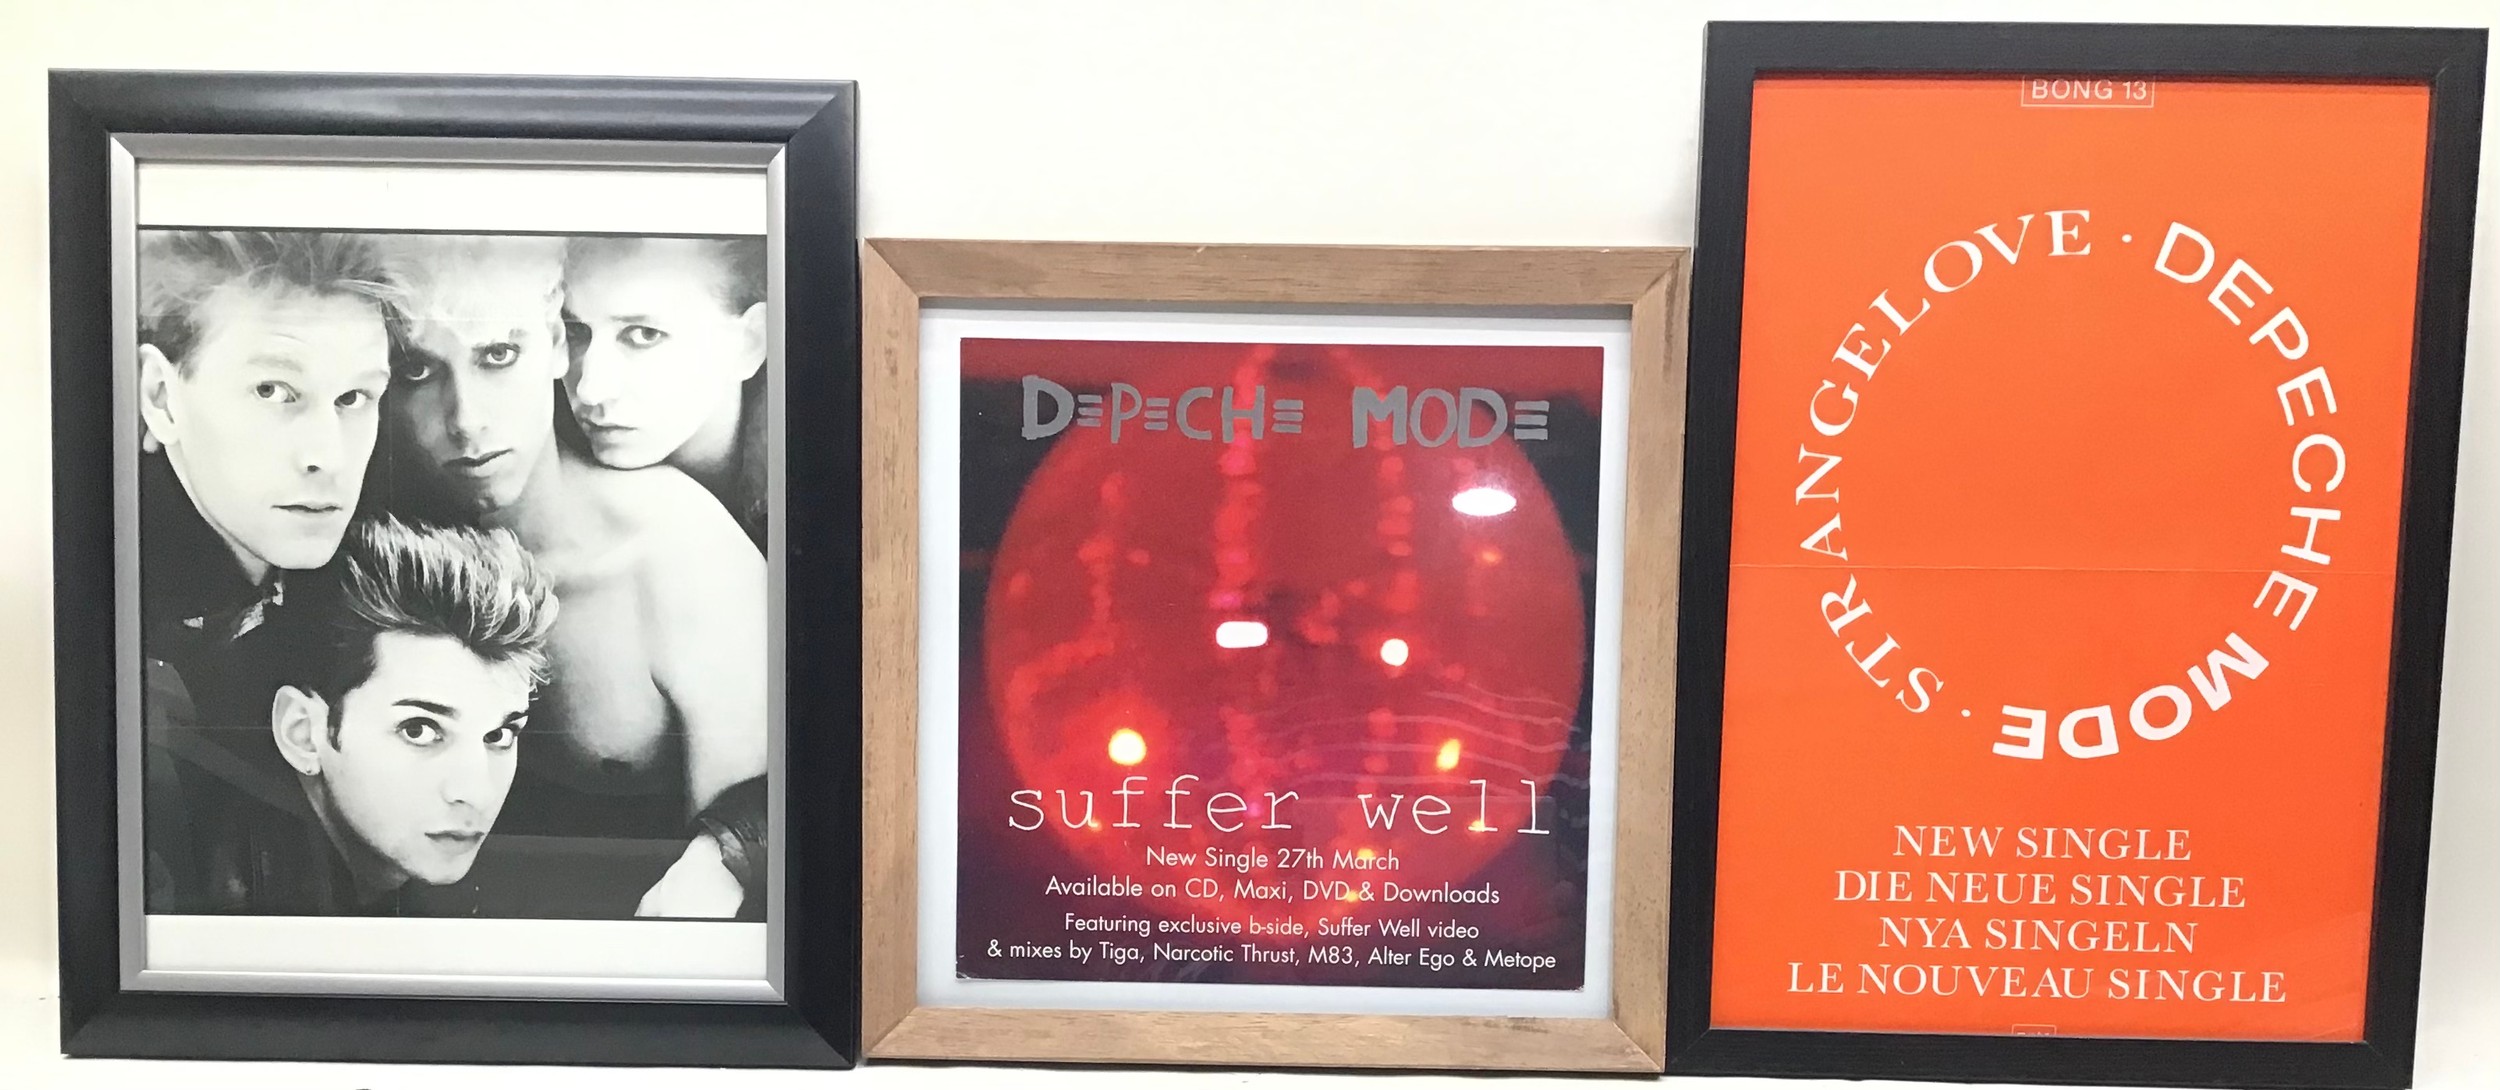 DEPECHE MODE POSTERS X 3. These are varying in size and include a promotional material for the